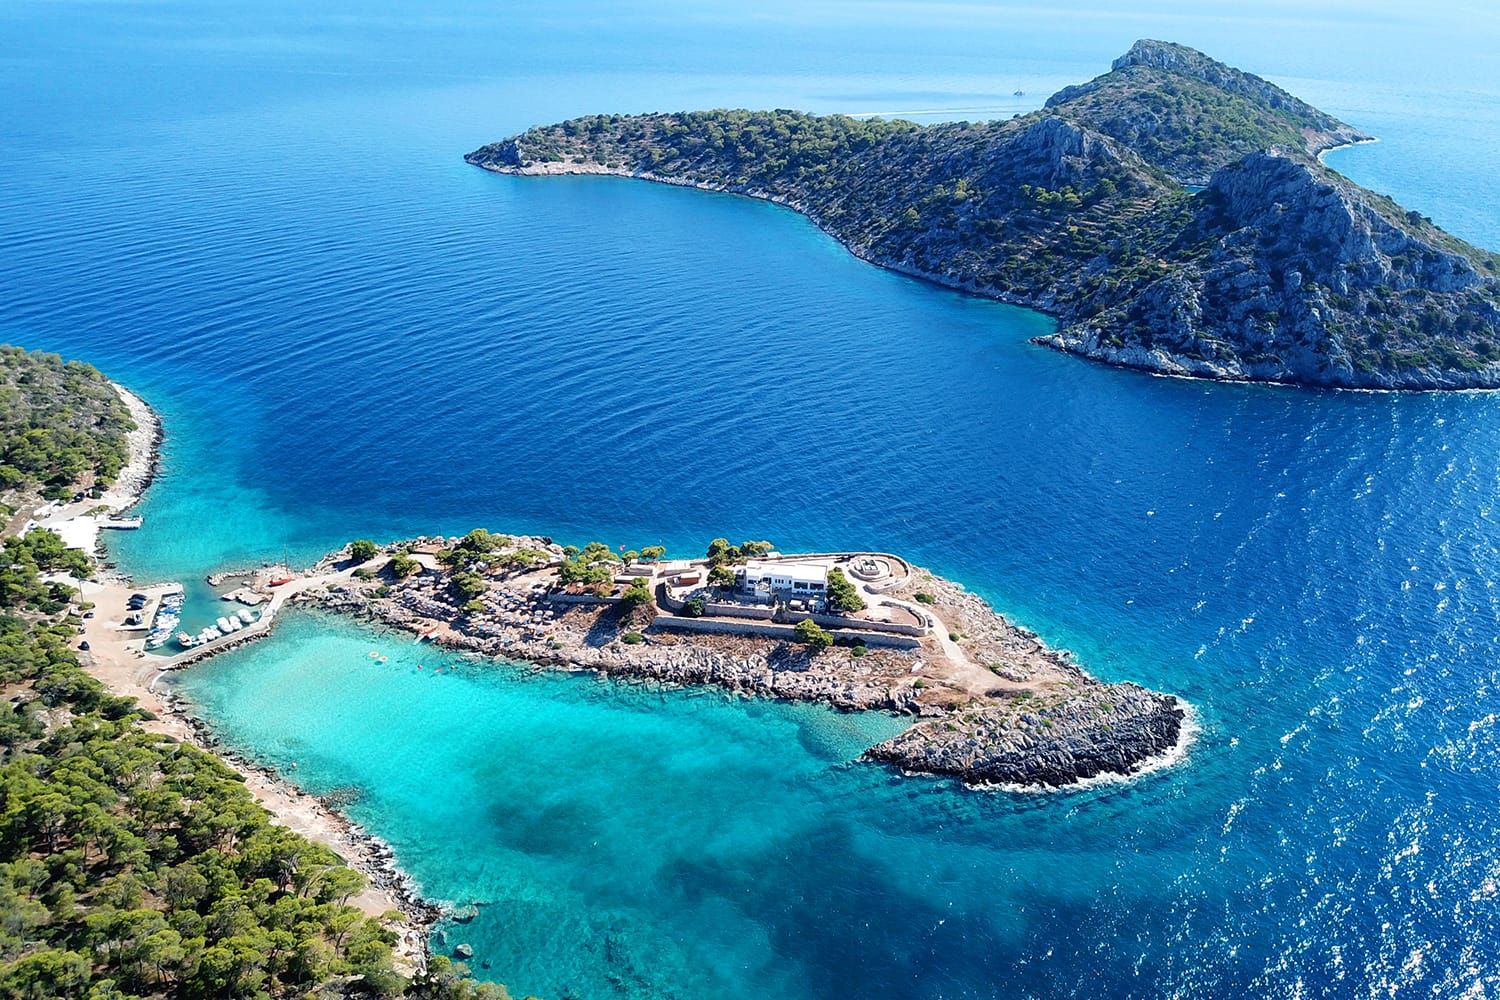 Aerial bird's eye view photo taken by drone of Aponisos beach and lake with clear turquoise waters and pine trees, Agistri island, Saronic gulf, Greece